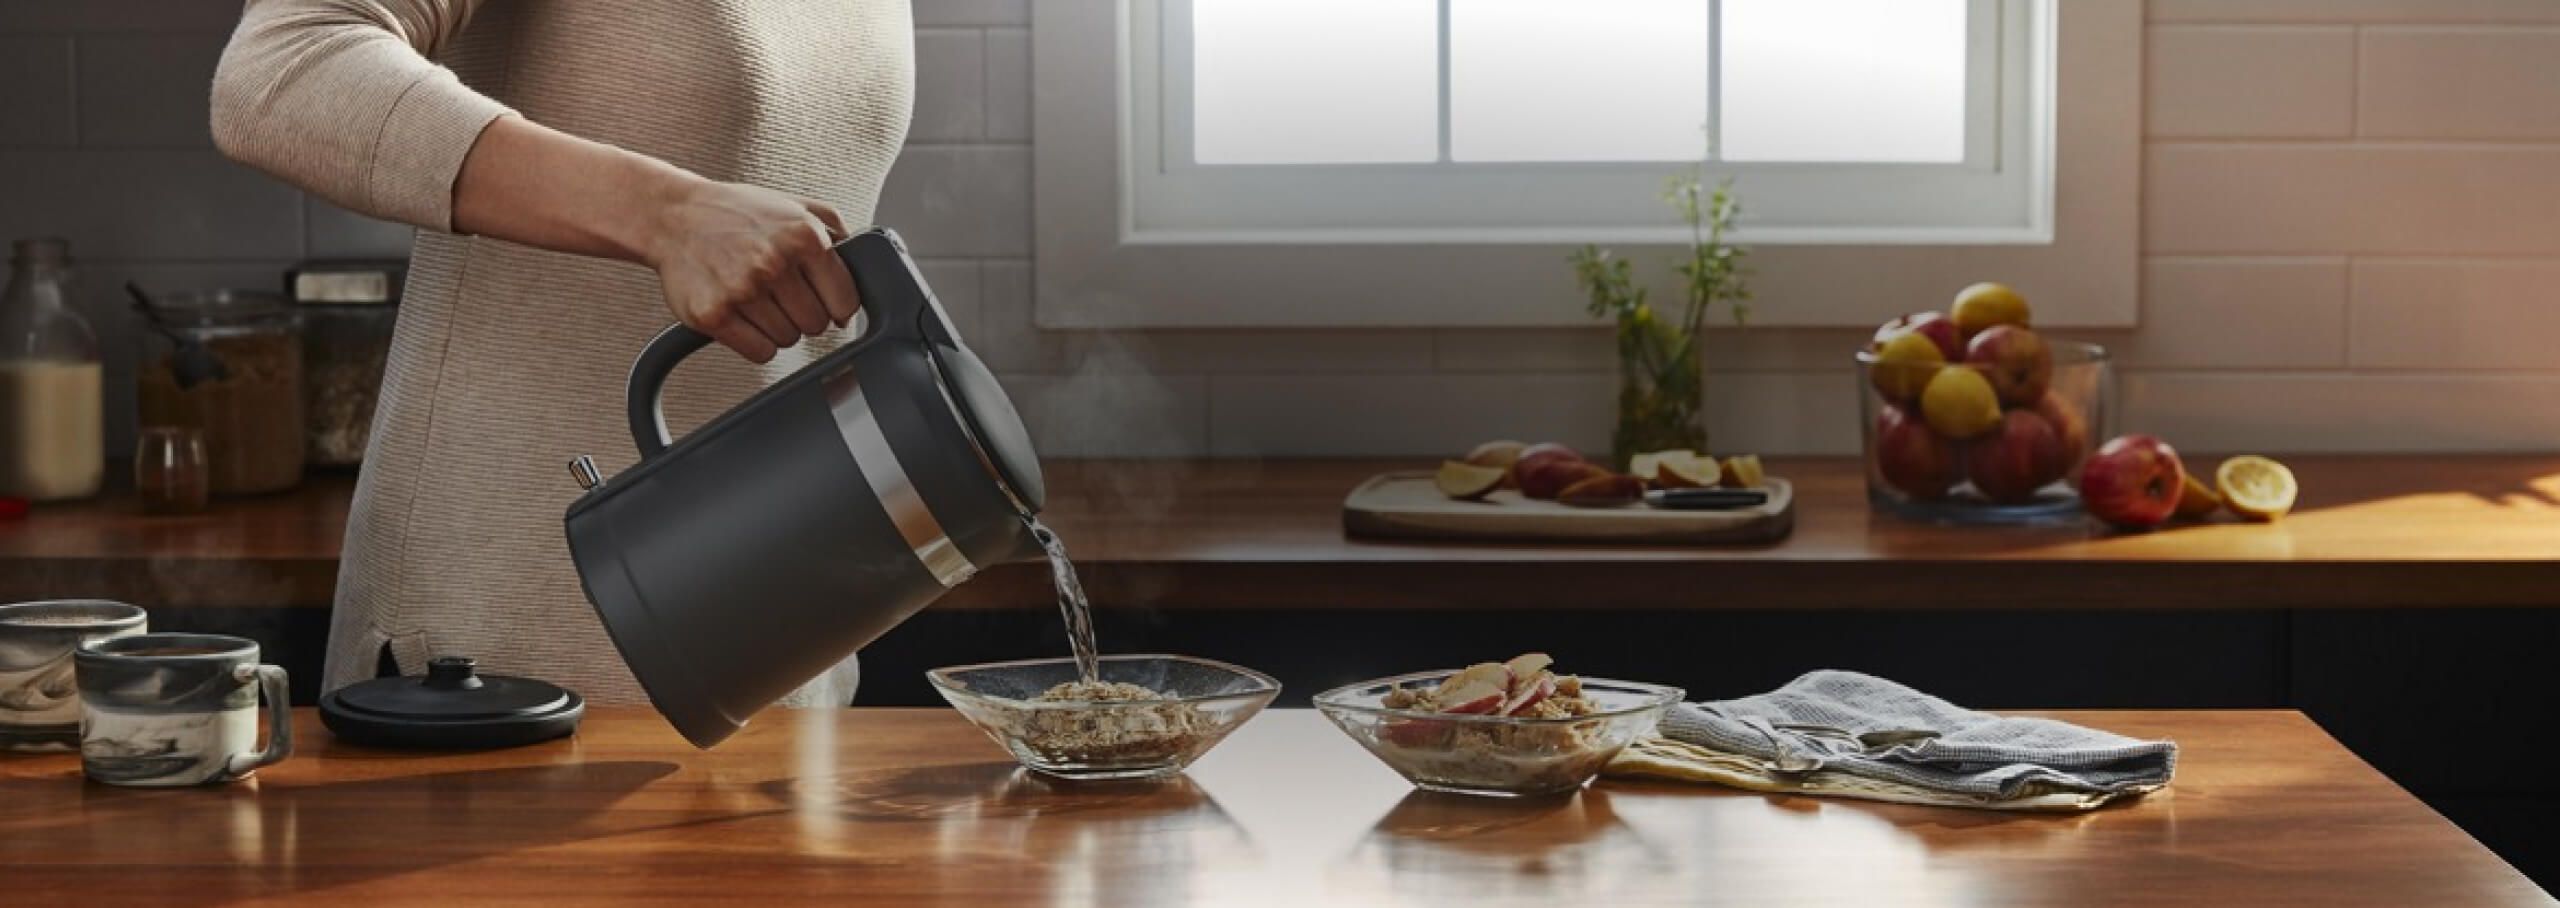 KitchenAid® electric and hot water Kettles help you prepare your favorites.